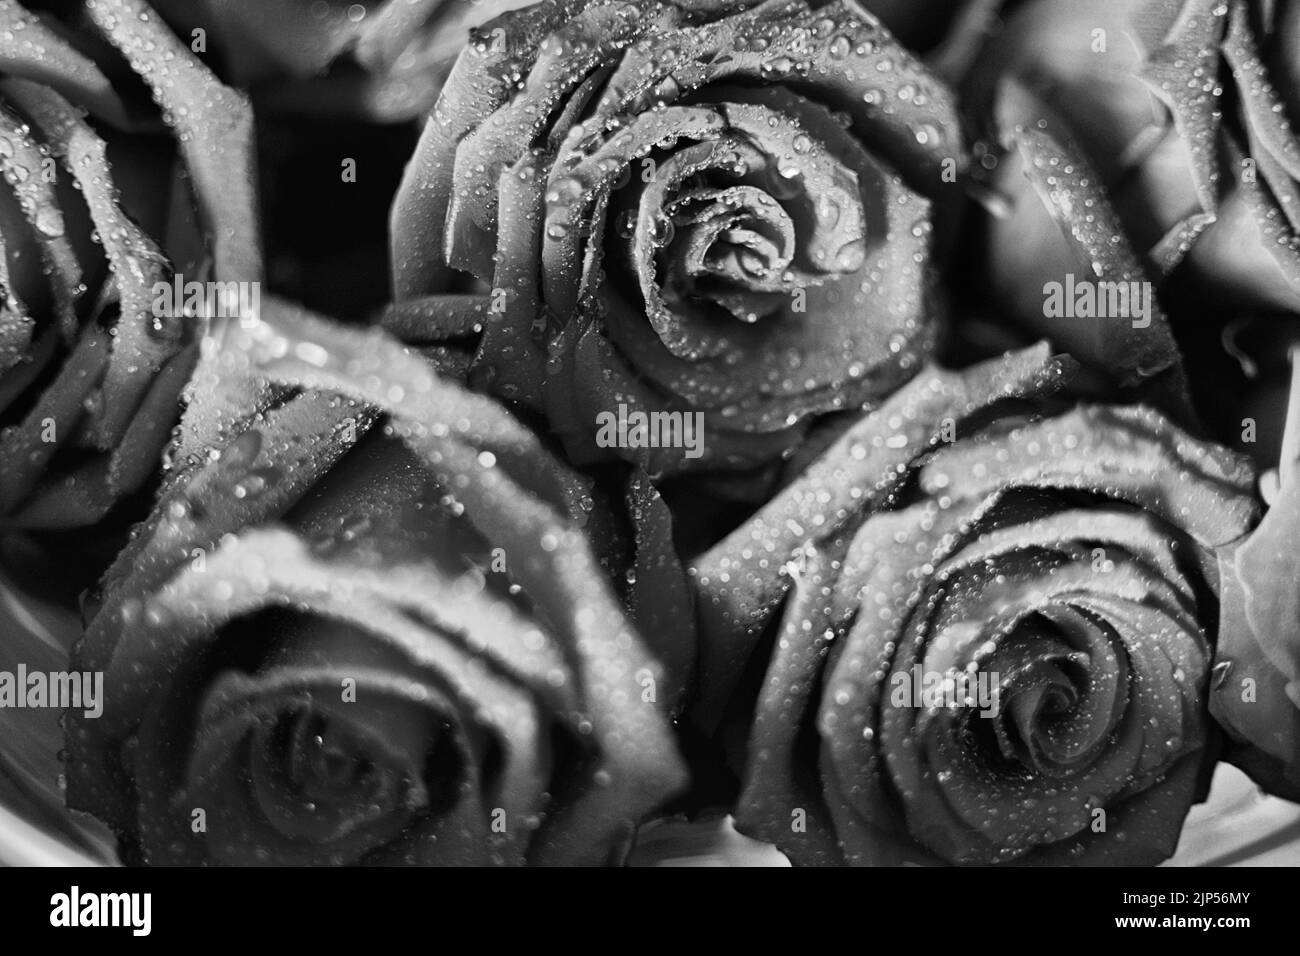 Black Rose Petals Background Water Drops Stock Photo 361321919